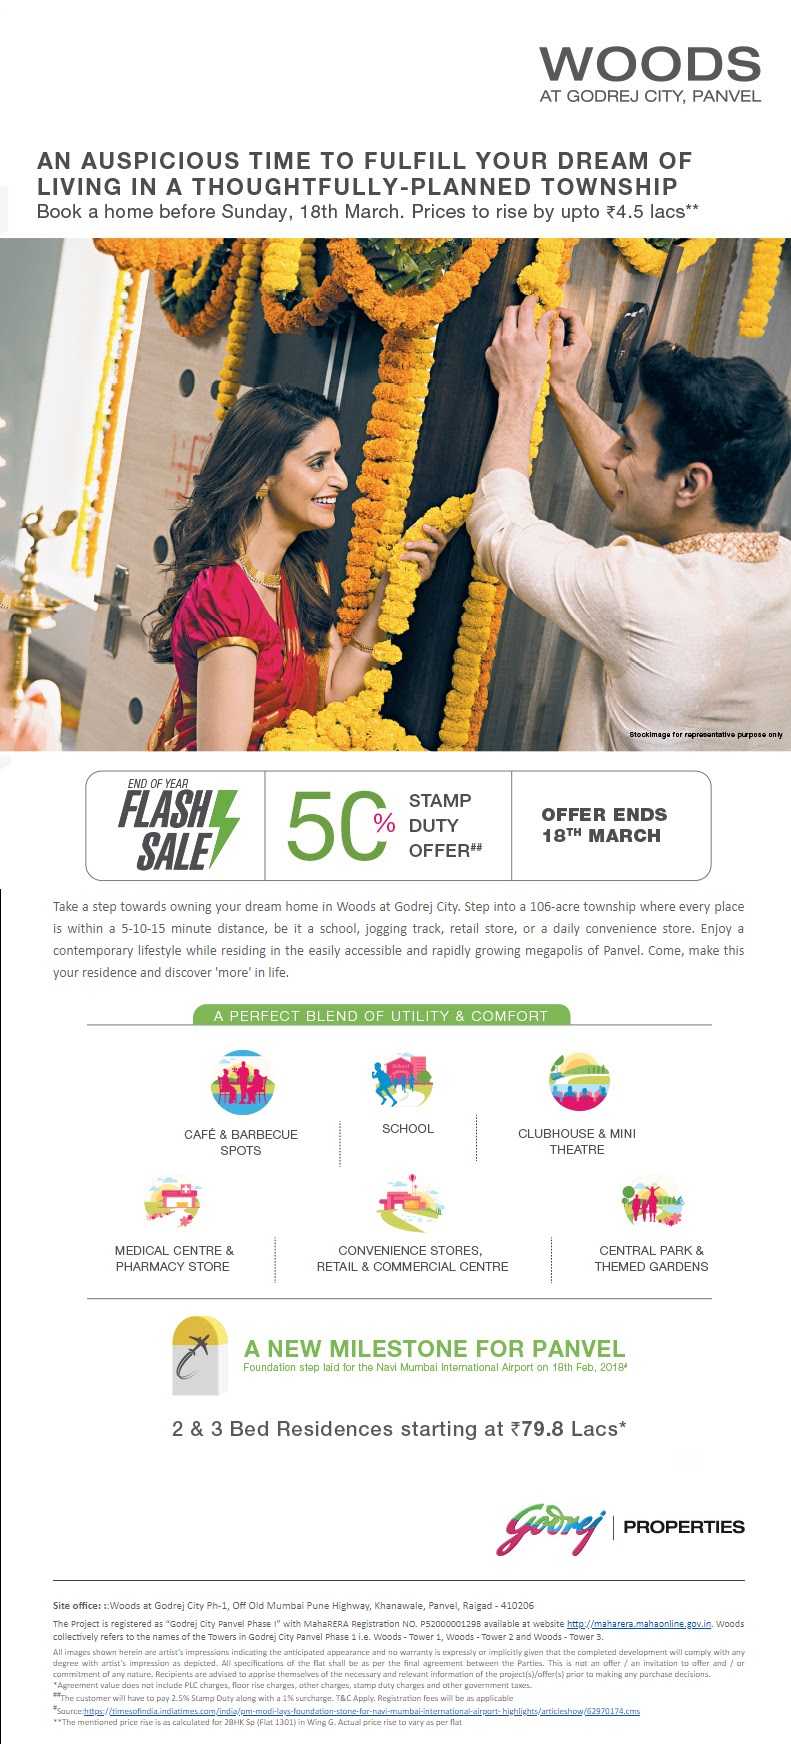 Book your home with 50% stamp duty offer at Godrej Woods in Navi Mumbai Update